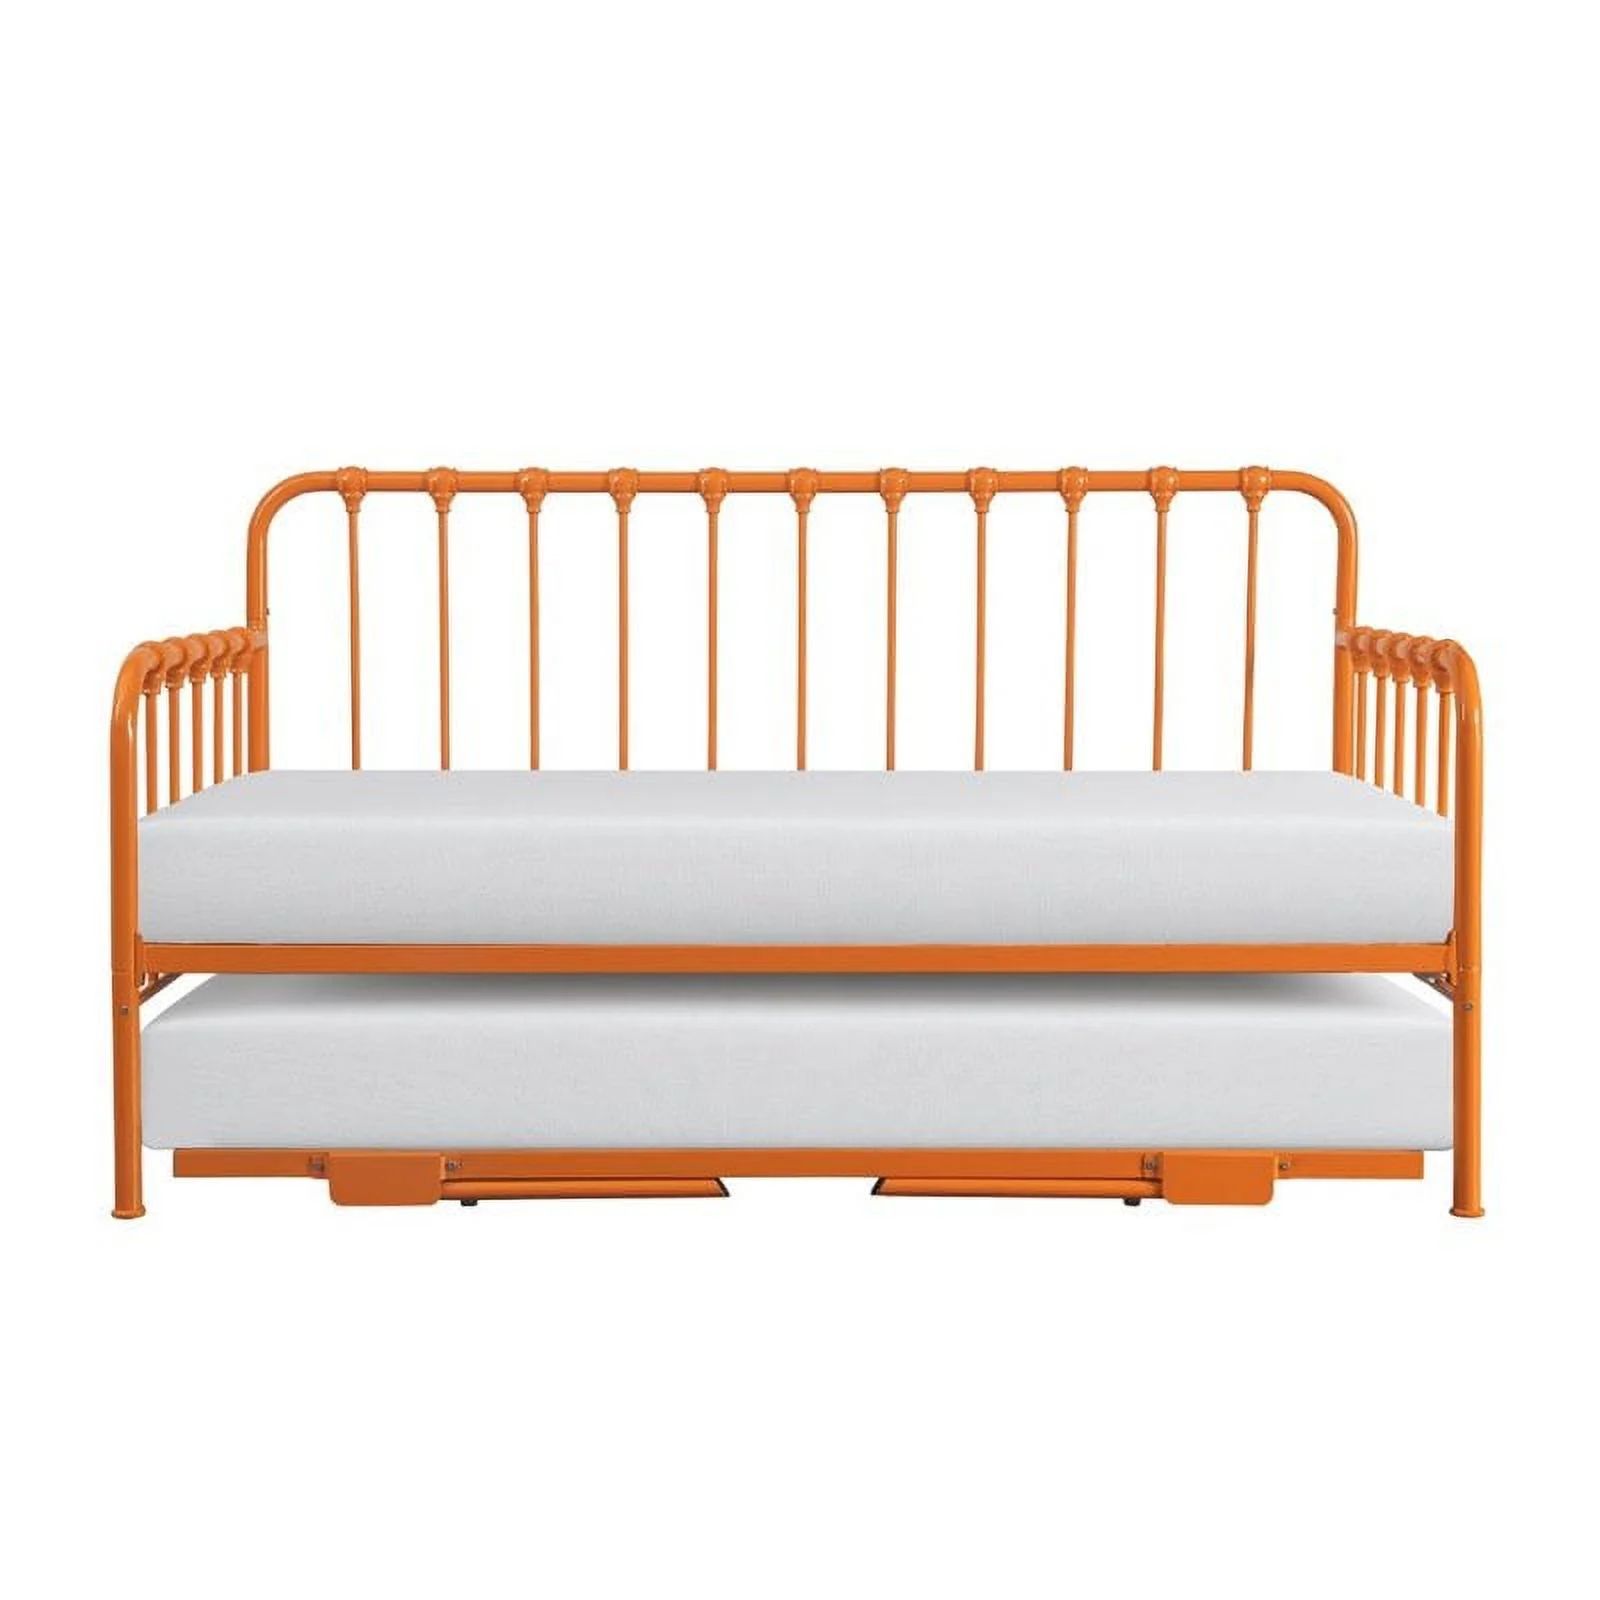 Lexicon Constance Metal Daybed with Trundle in Orange - Walmart.com | Walmart (US)